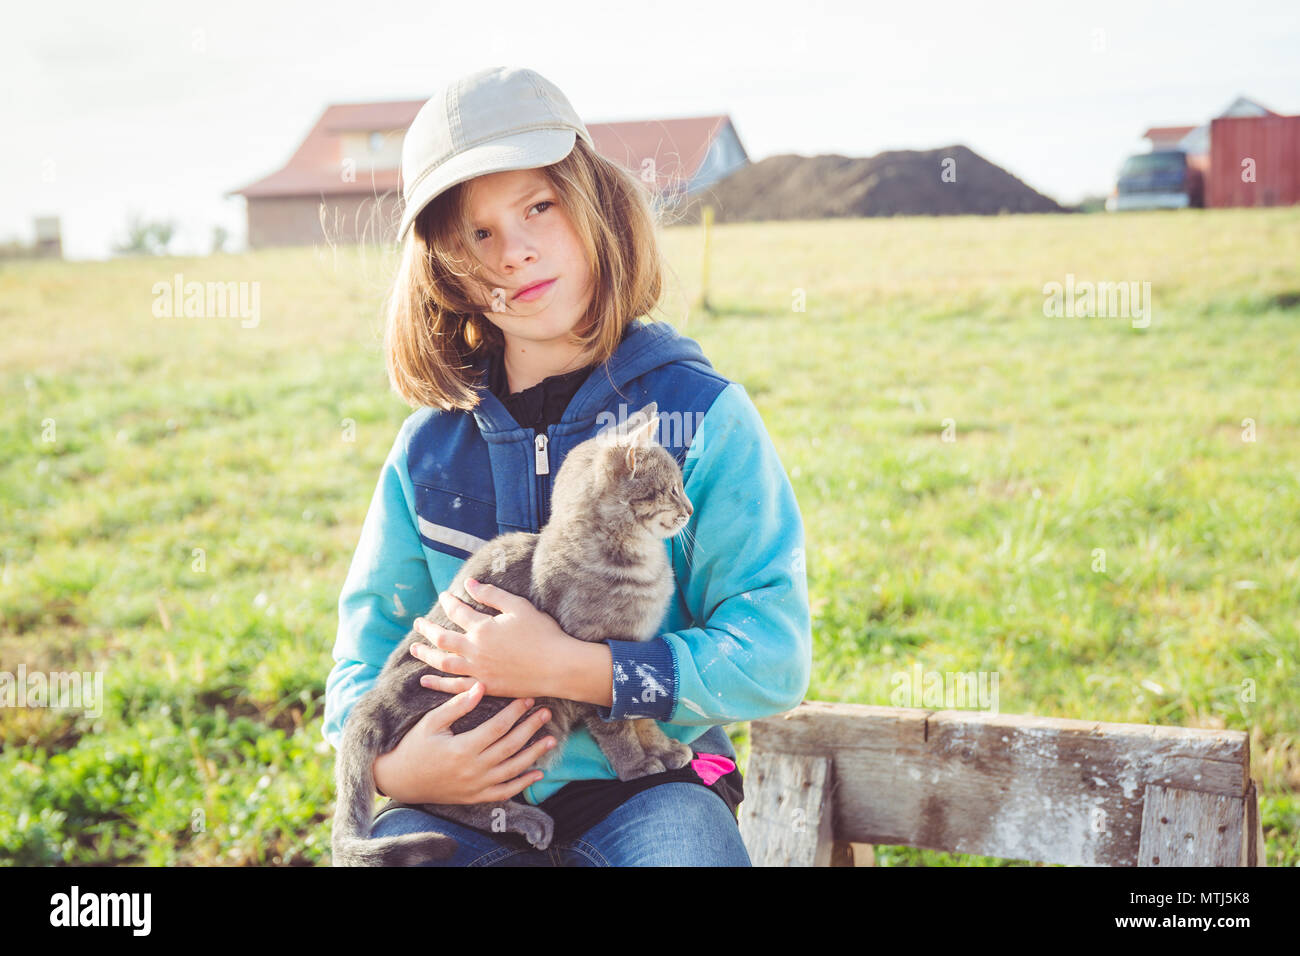 Girl child / tween holding pet cat (grey tabby kitten) protectively on building construction site whilst looking deep in thought Stock Photo